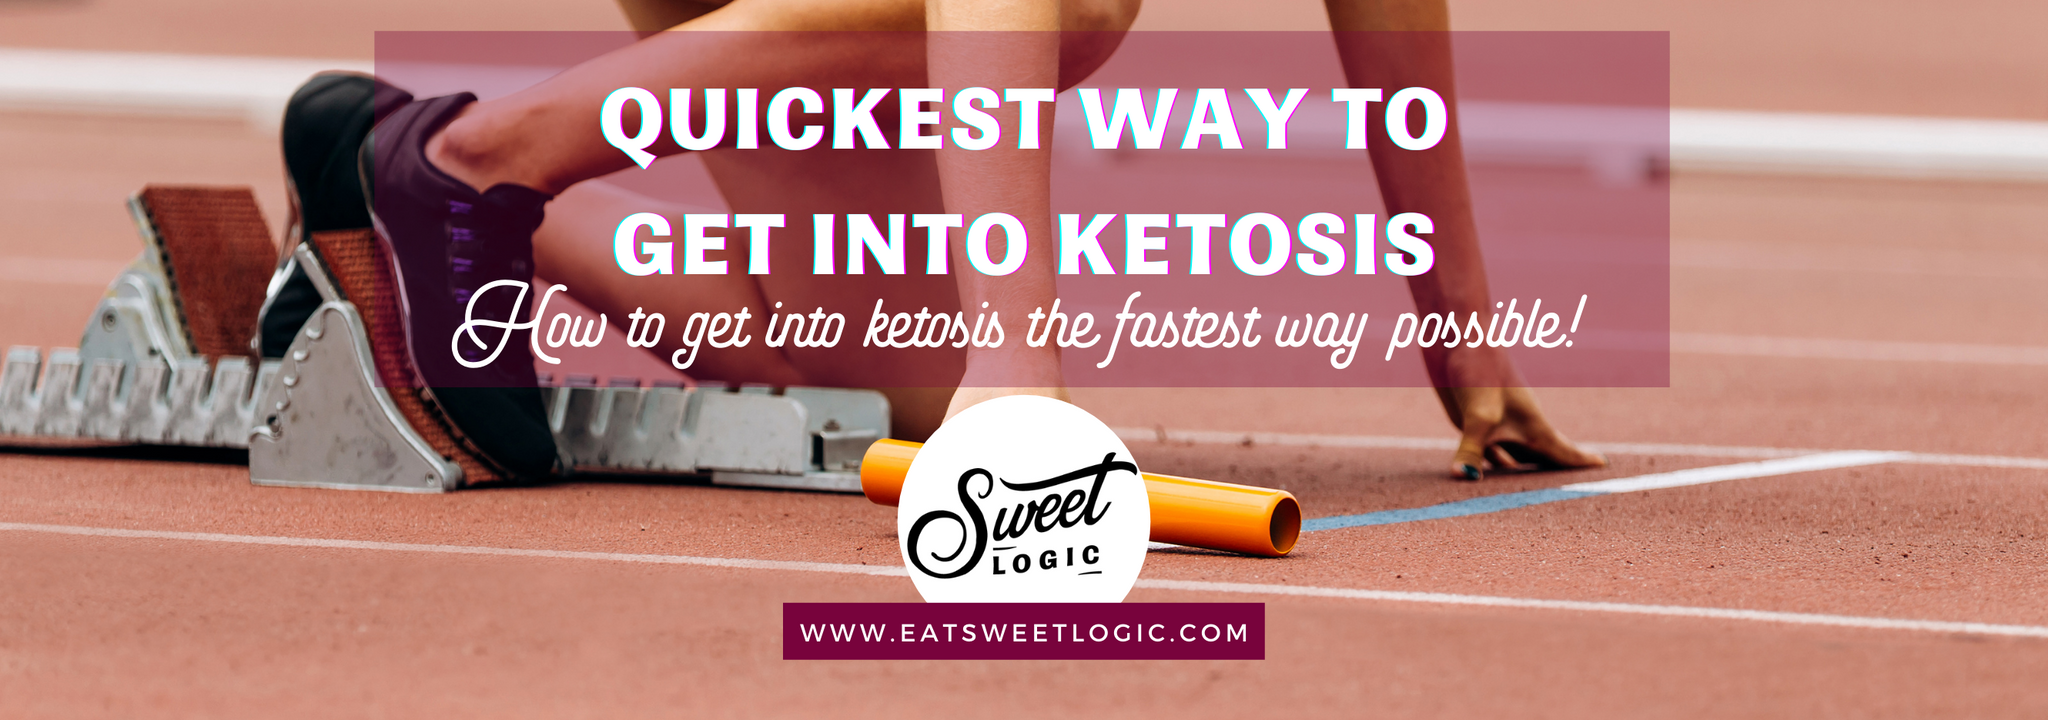 Quickest Way to Get into Ketosis